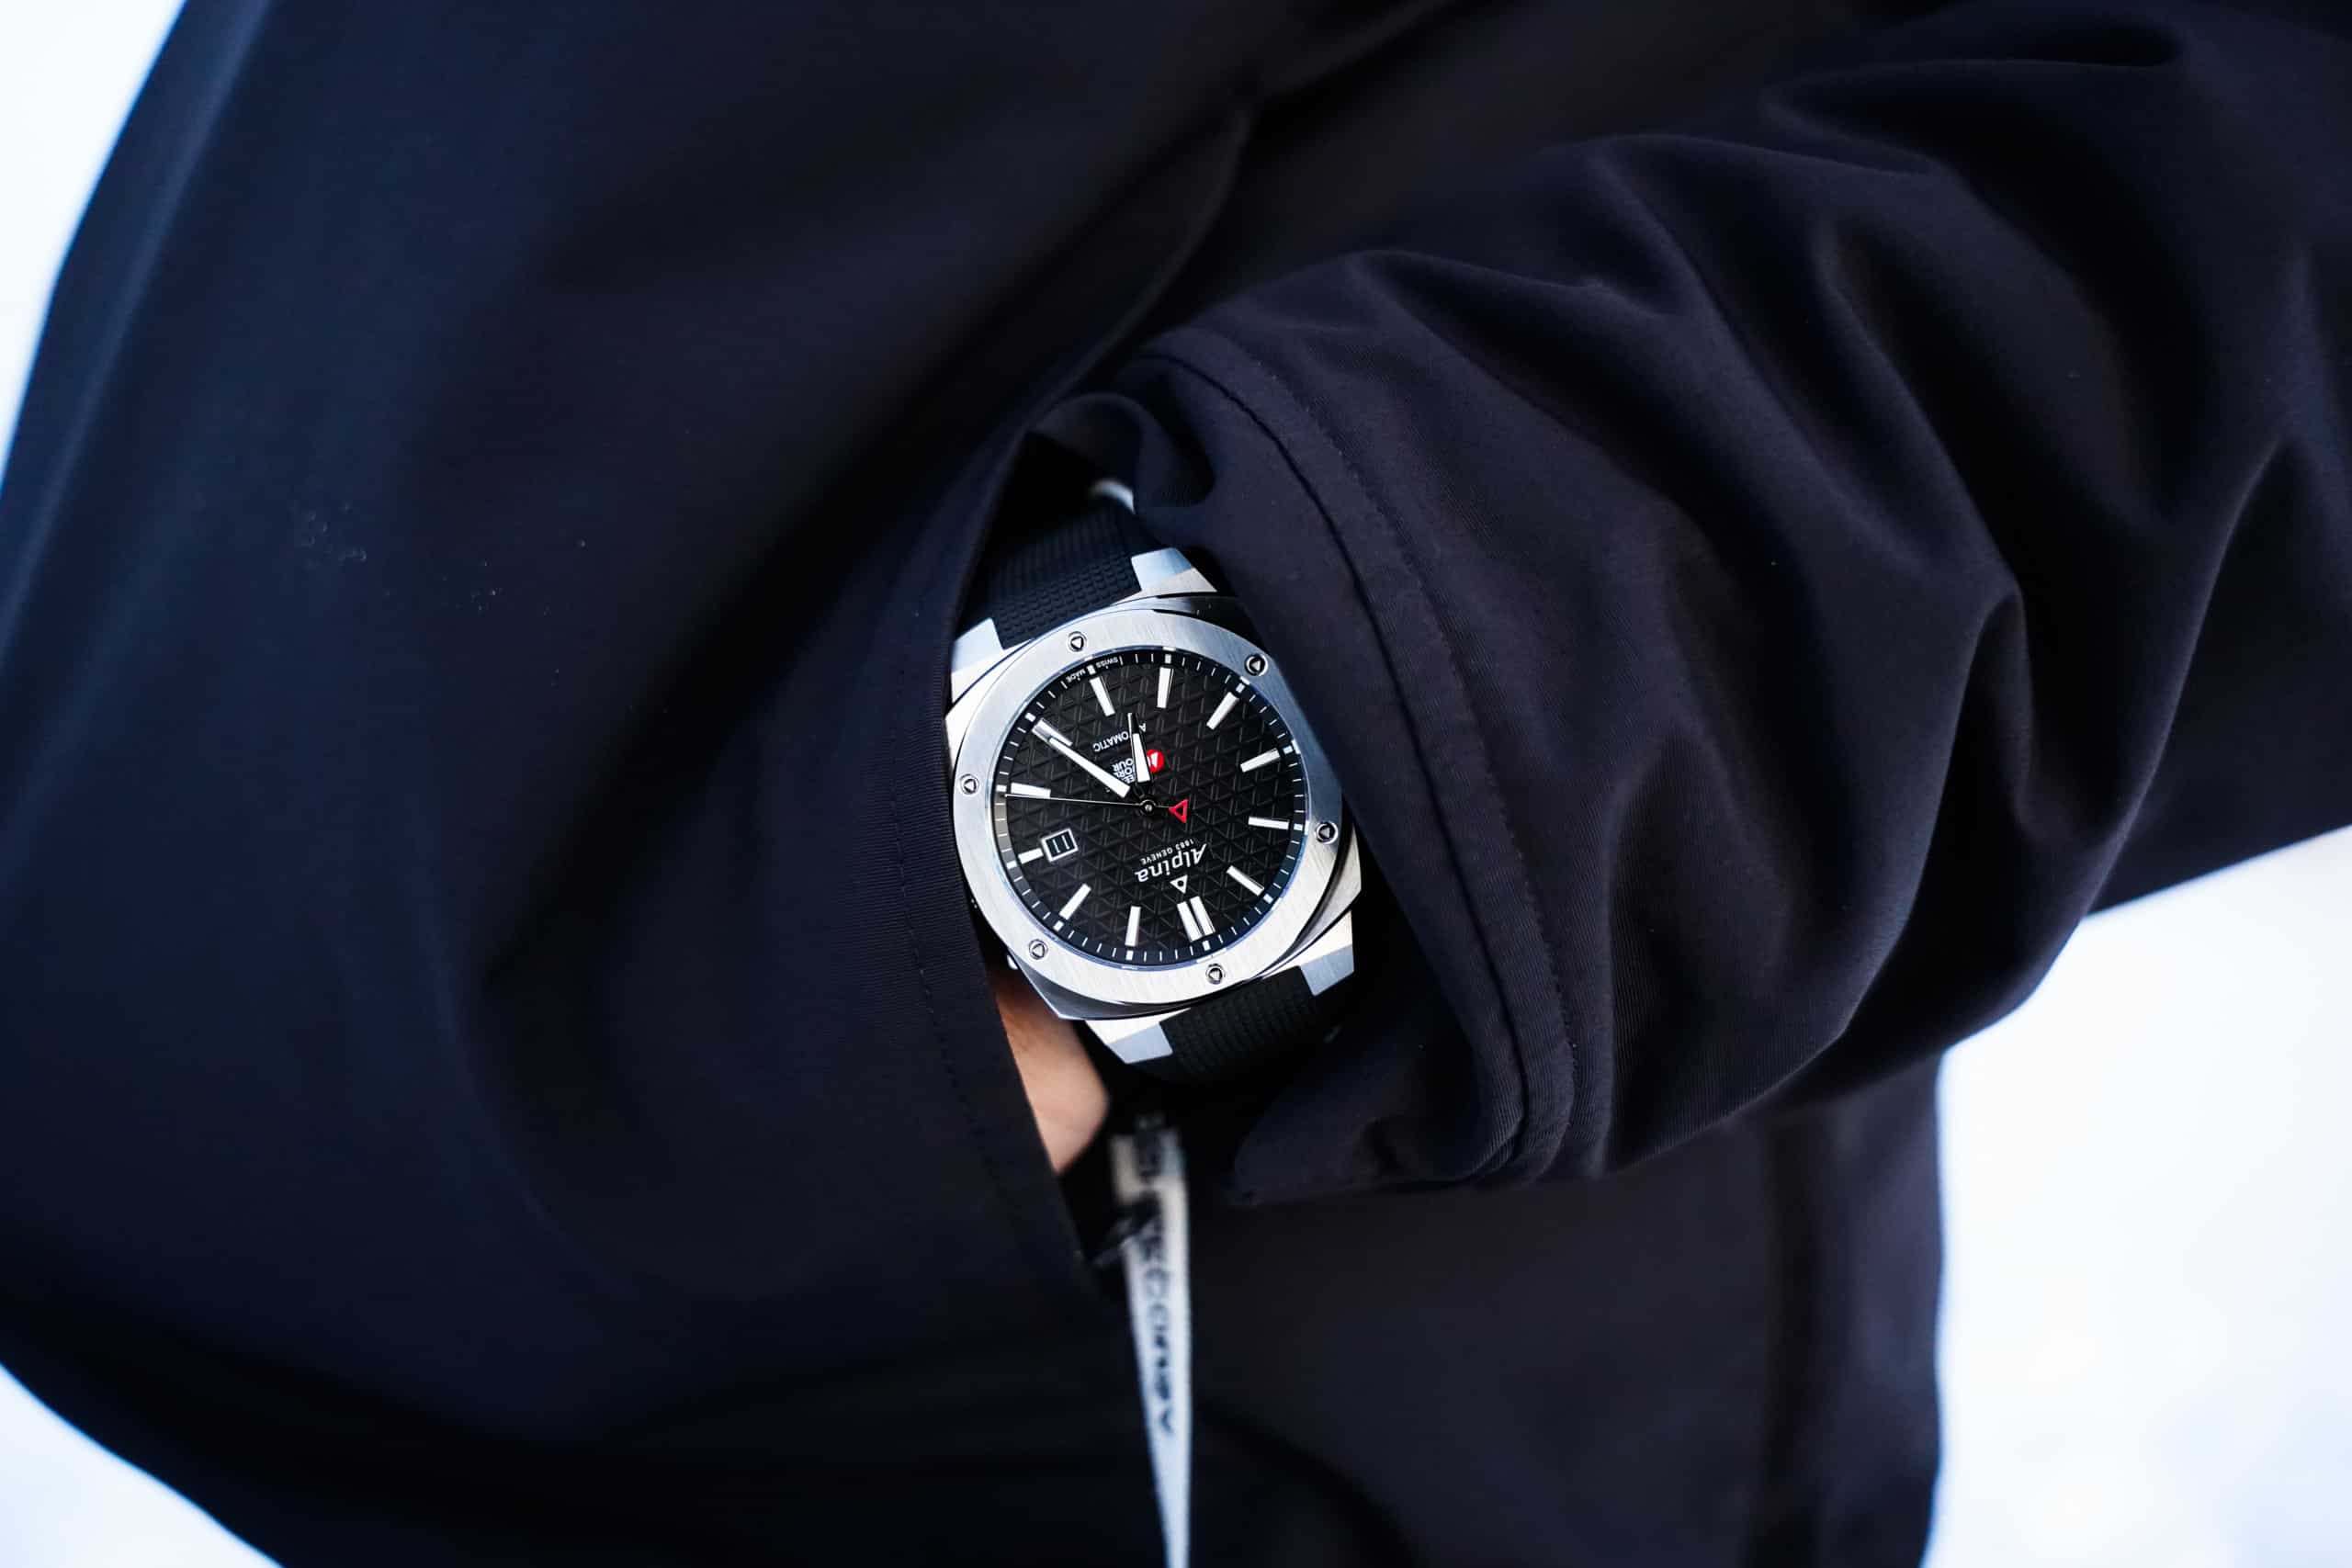 Full Send Personified: A Day of Extreme Freeride Skiing, Extreme Terrain  and 'Extreme' Watches with Alpina - Worn & Wound